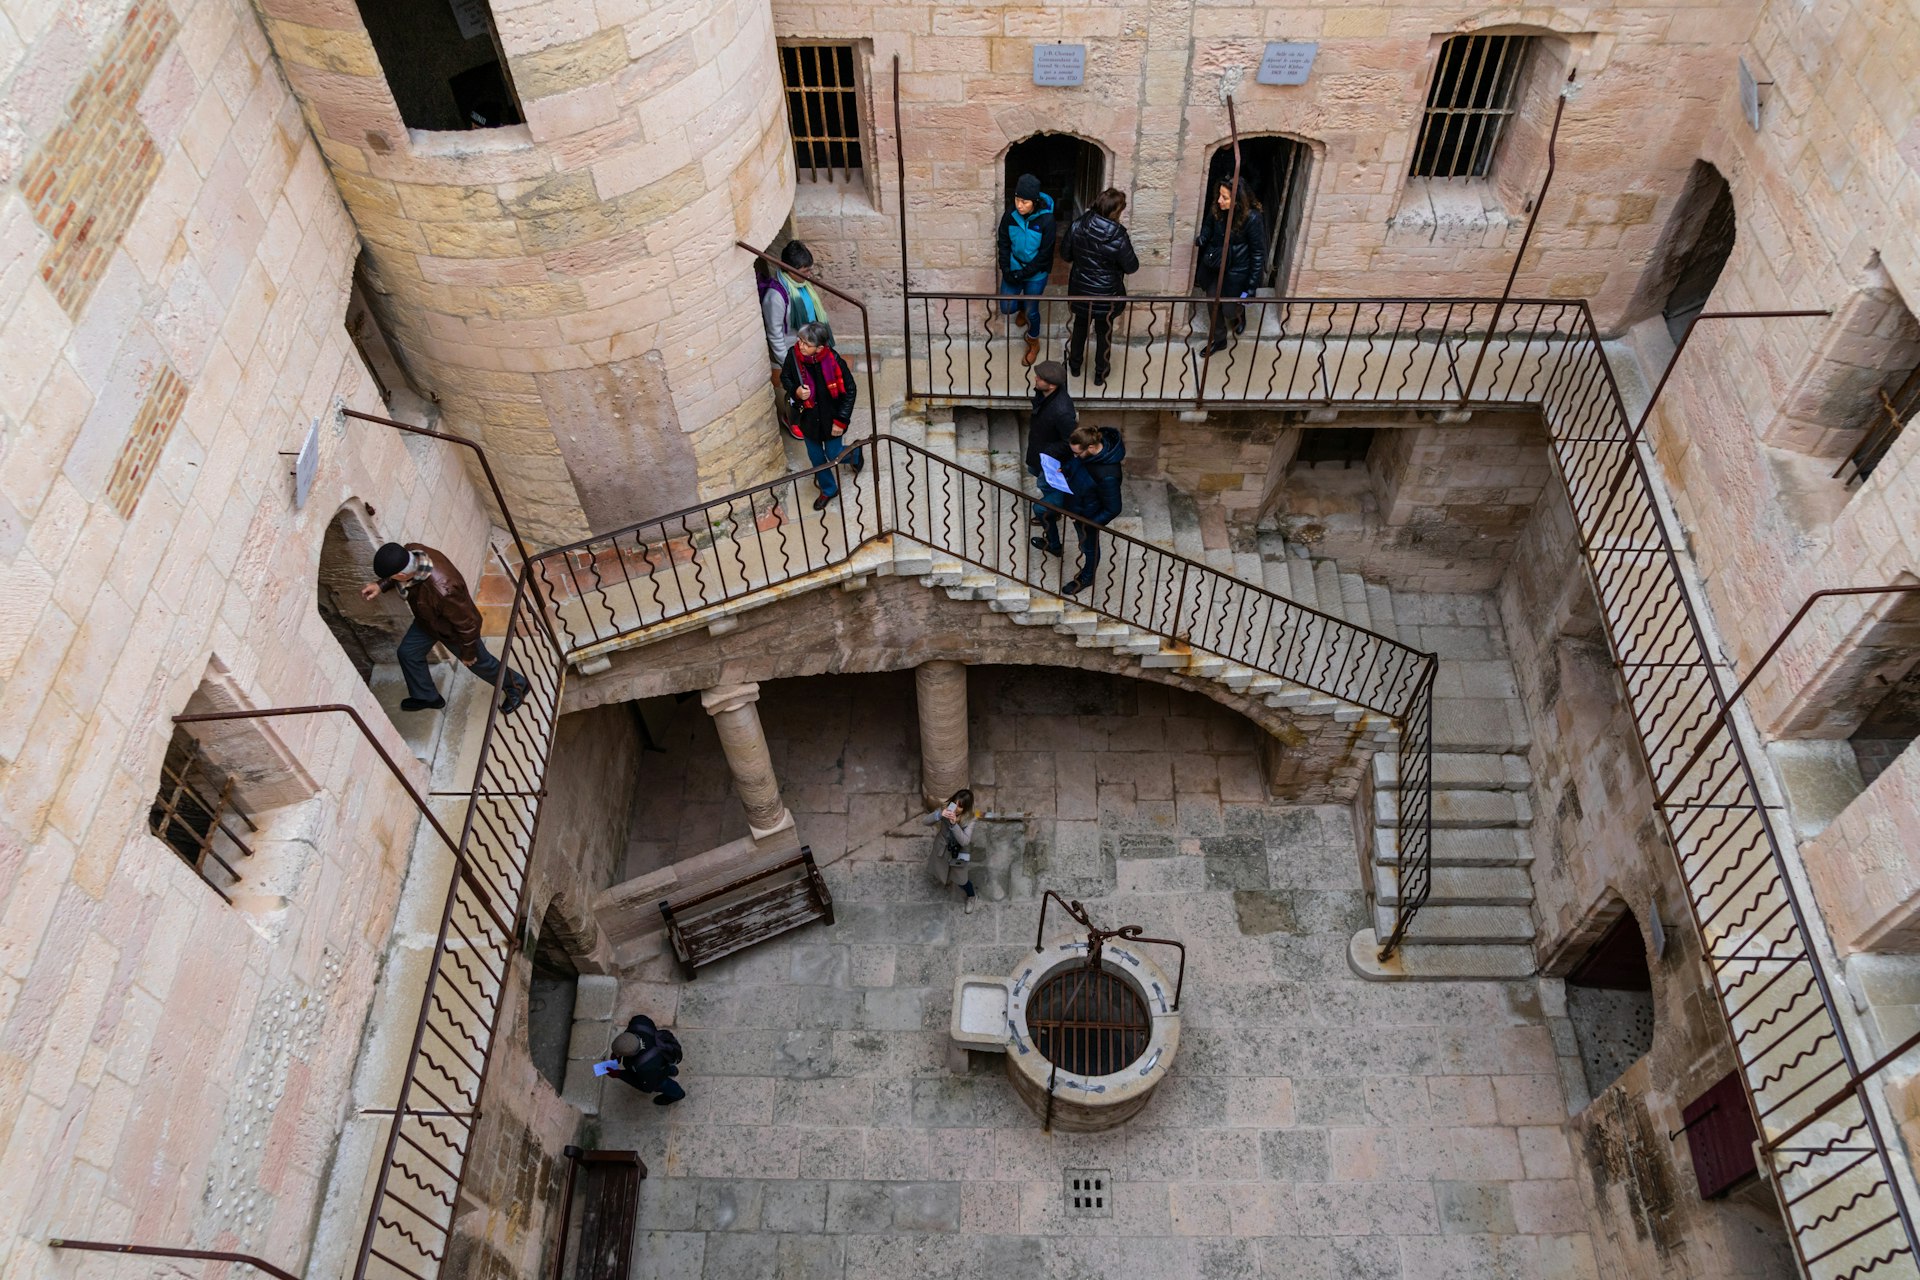 A series of stairs in an old fort and prison building viewed from above as tourists make their way around